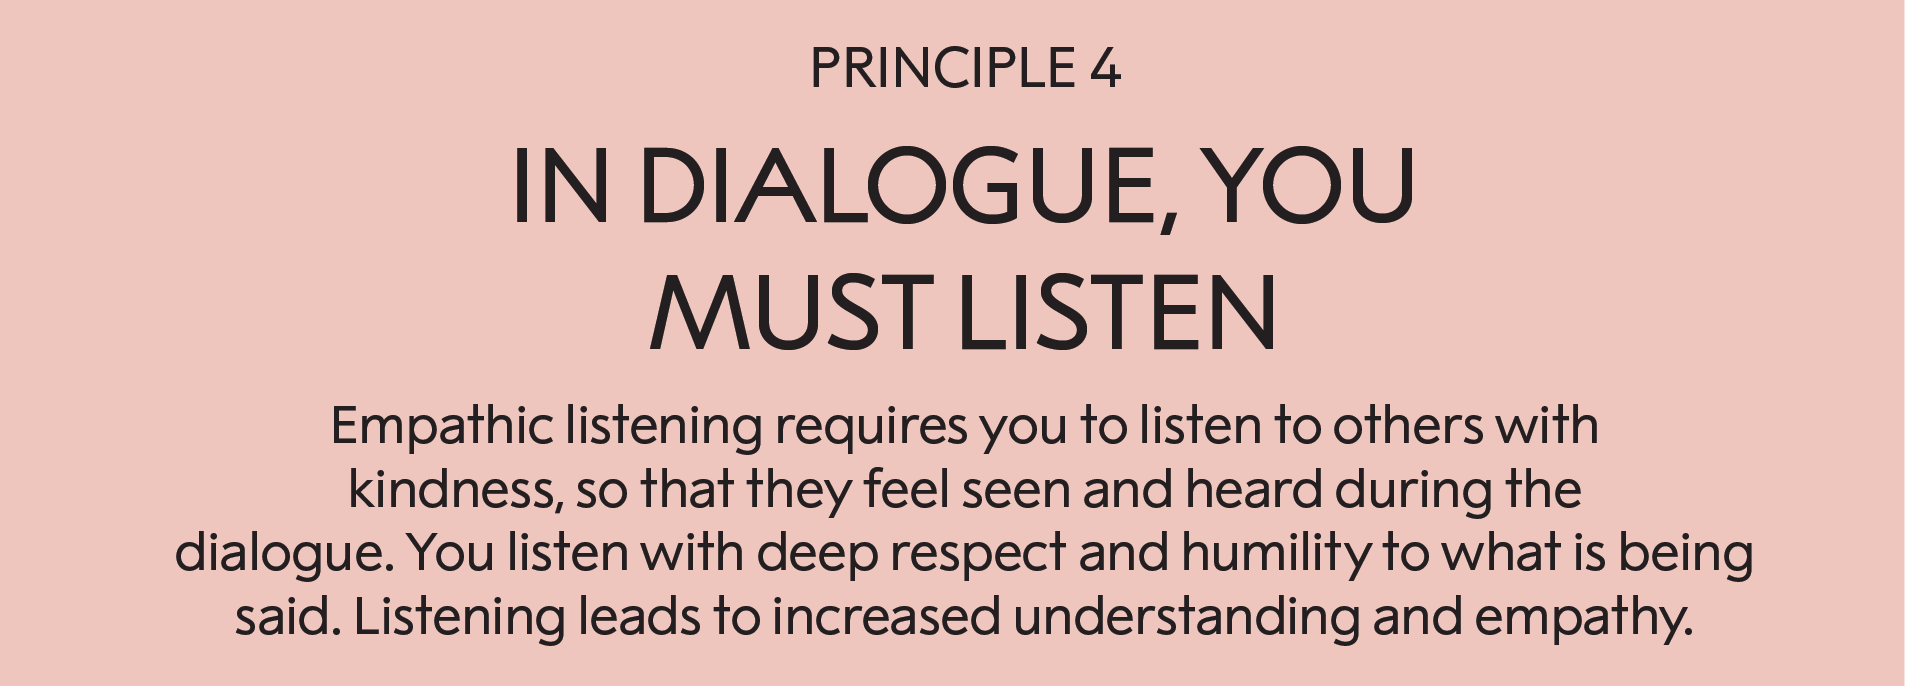 Principle 4: In a dialogue, you must listen :  Empathic listening requires you to listen to other people with kindness, so that they feel seen and heard during the dialogue. You listen with deep respect and humility to what is being said. Listening this way leads to increased understanding and empathy.    